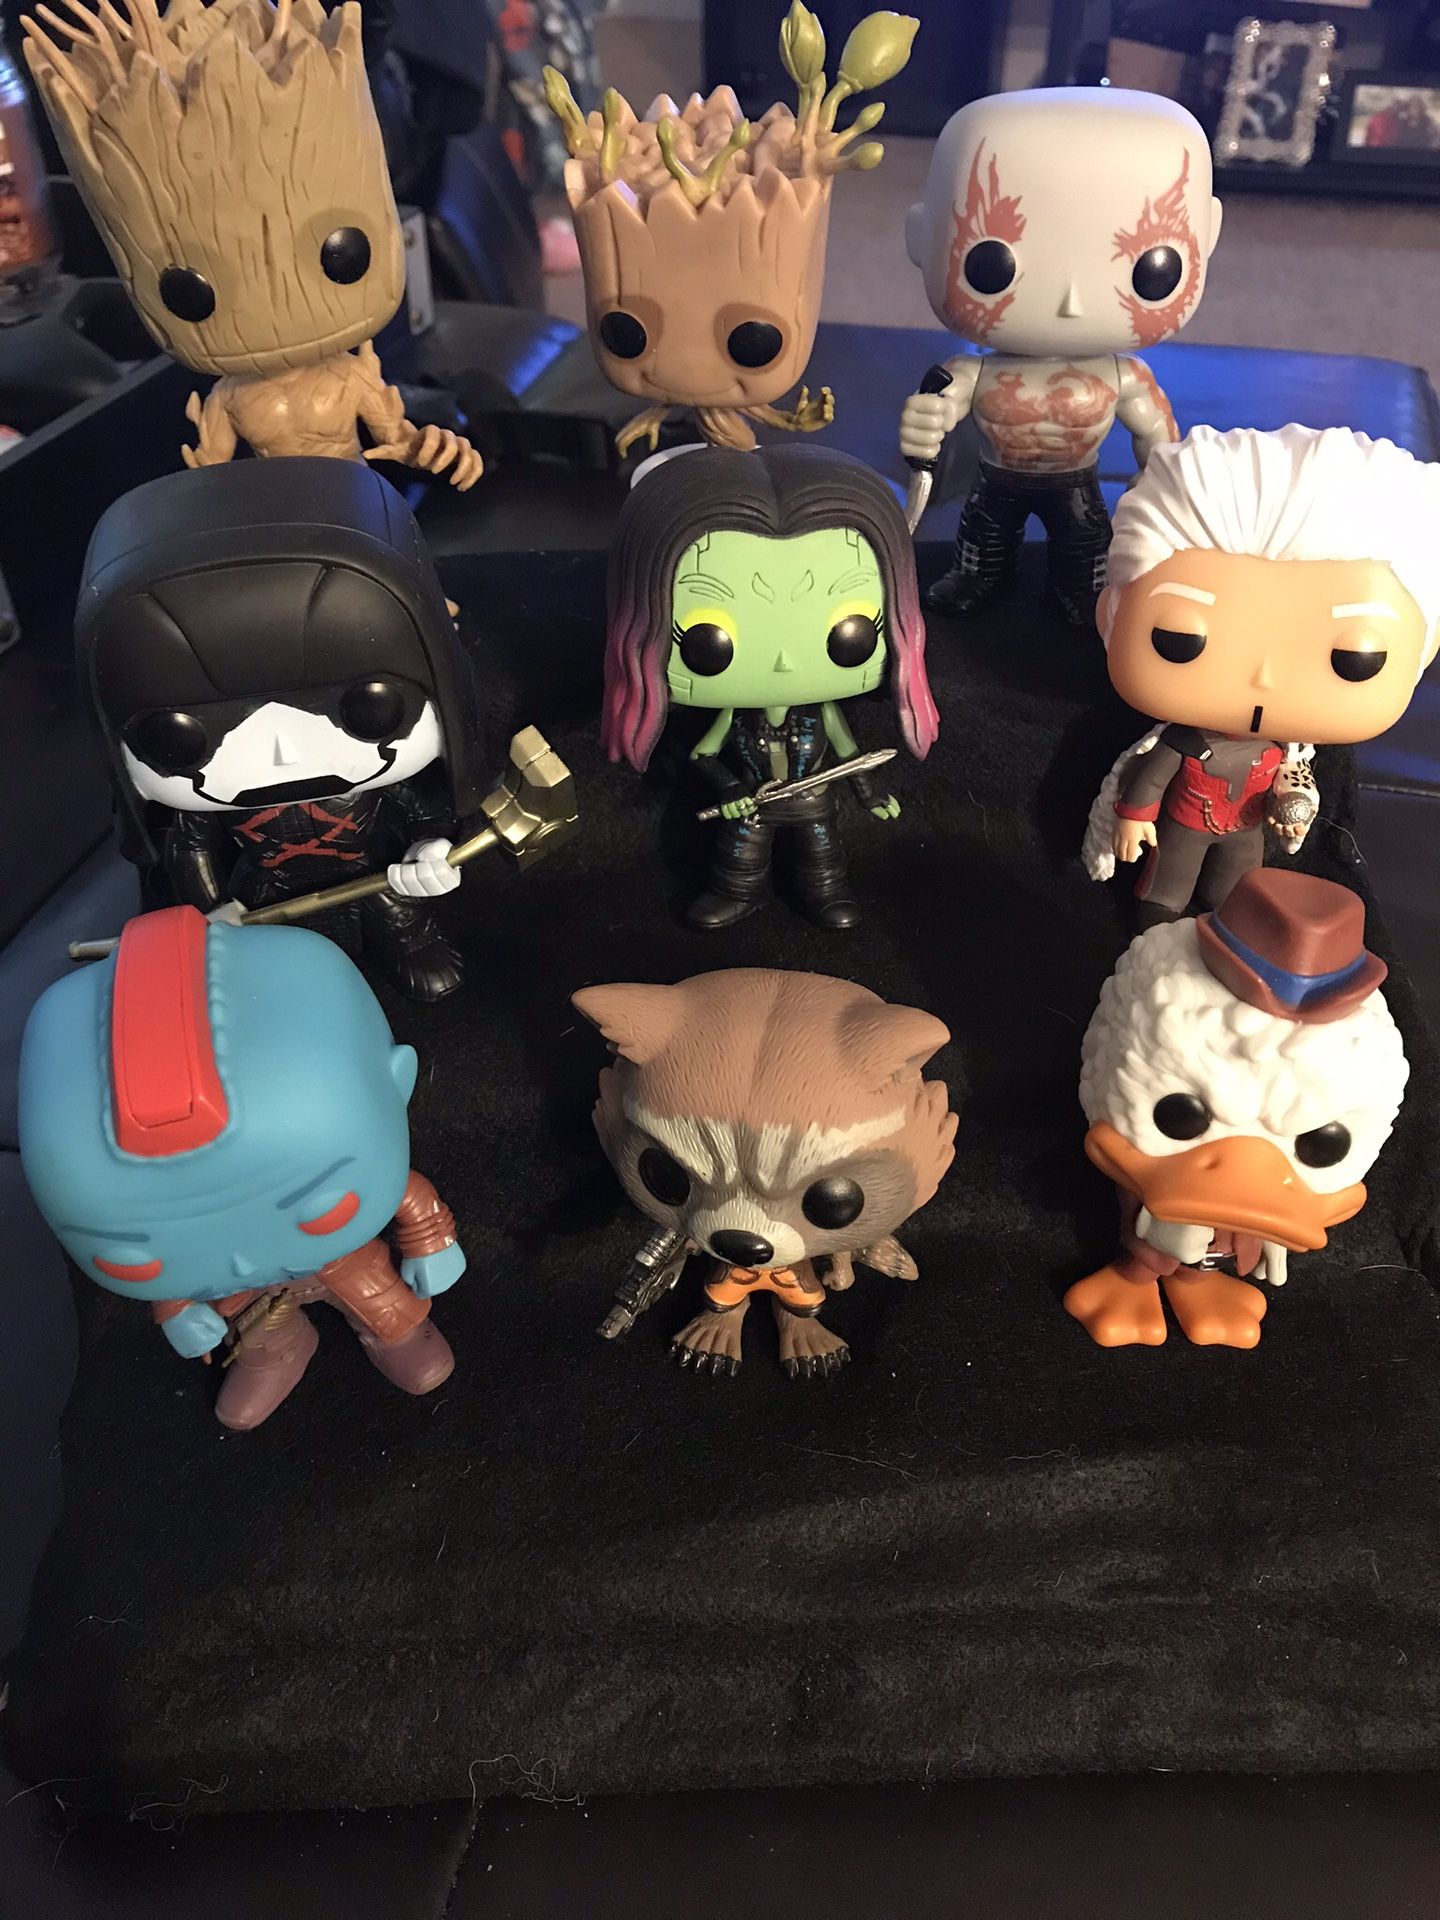 Guardians of the galaxy Funko pop set of 9